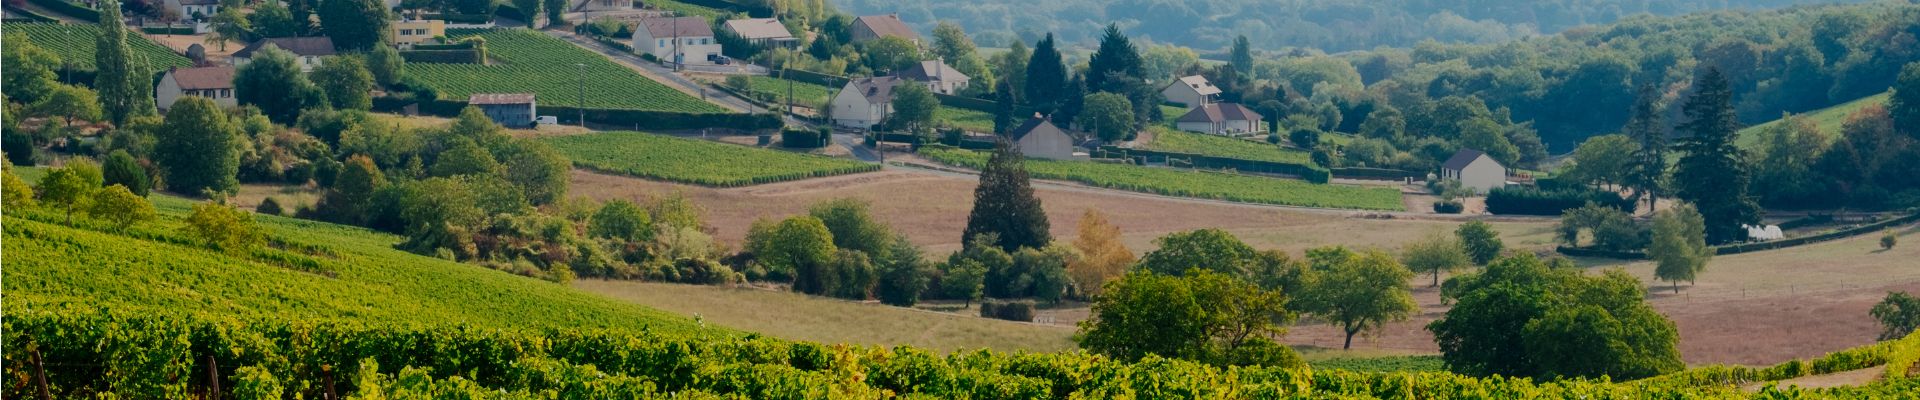 Loire Valley by Whelehans Wines